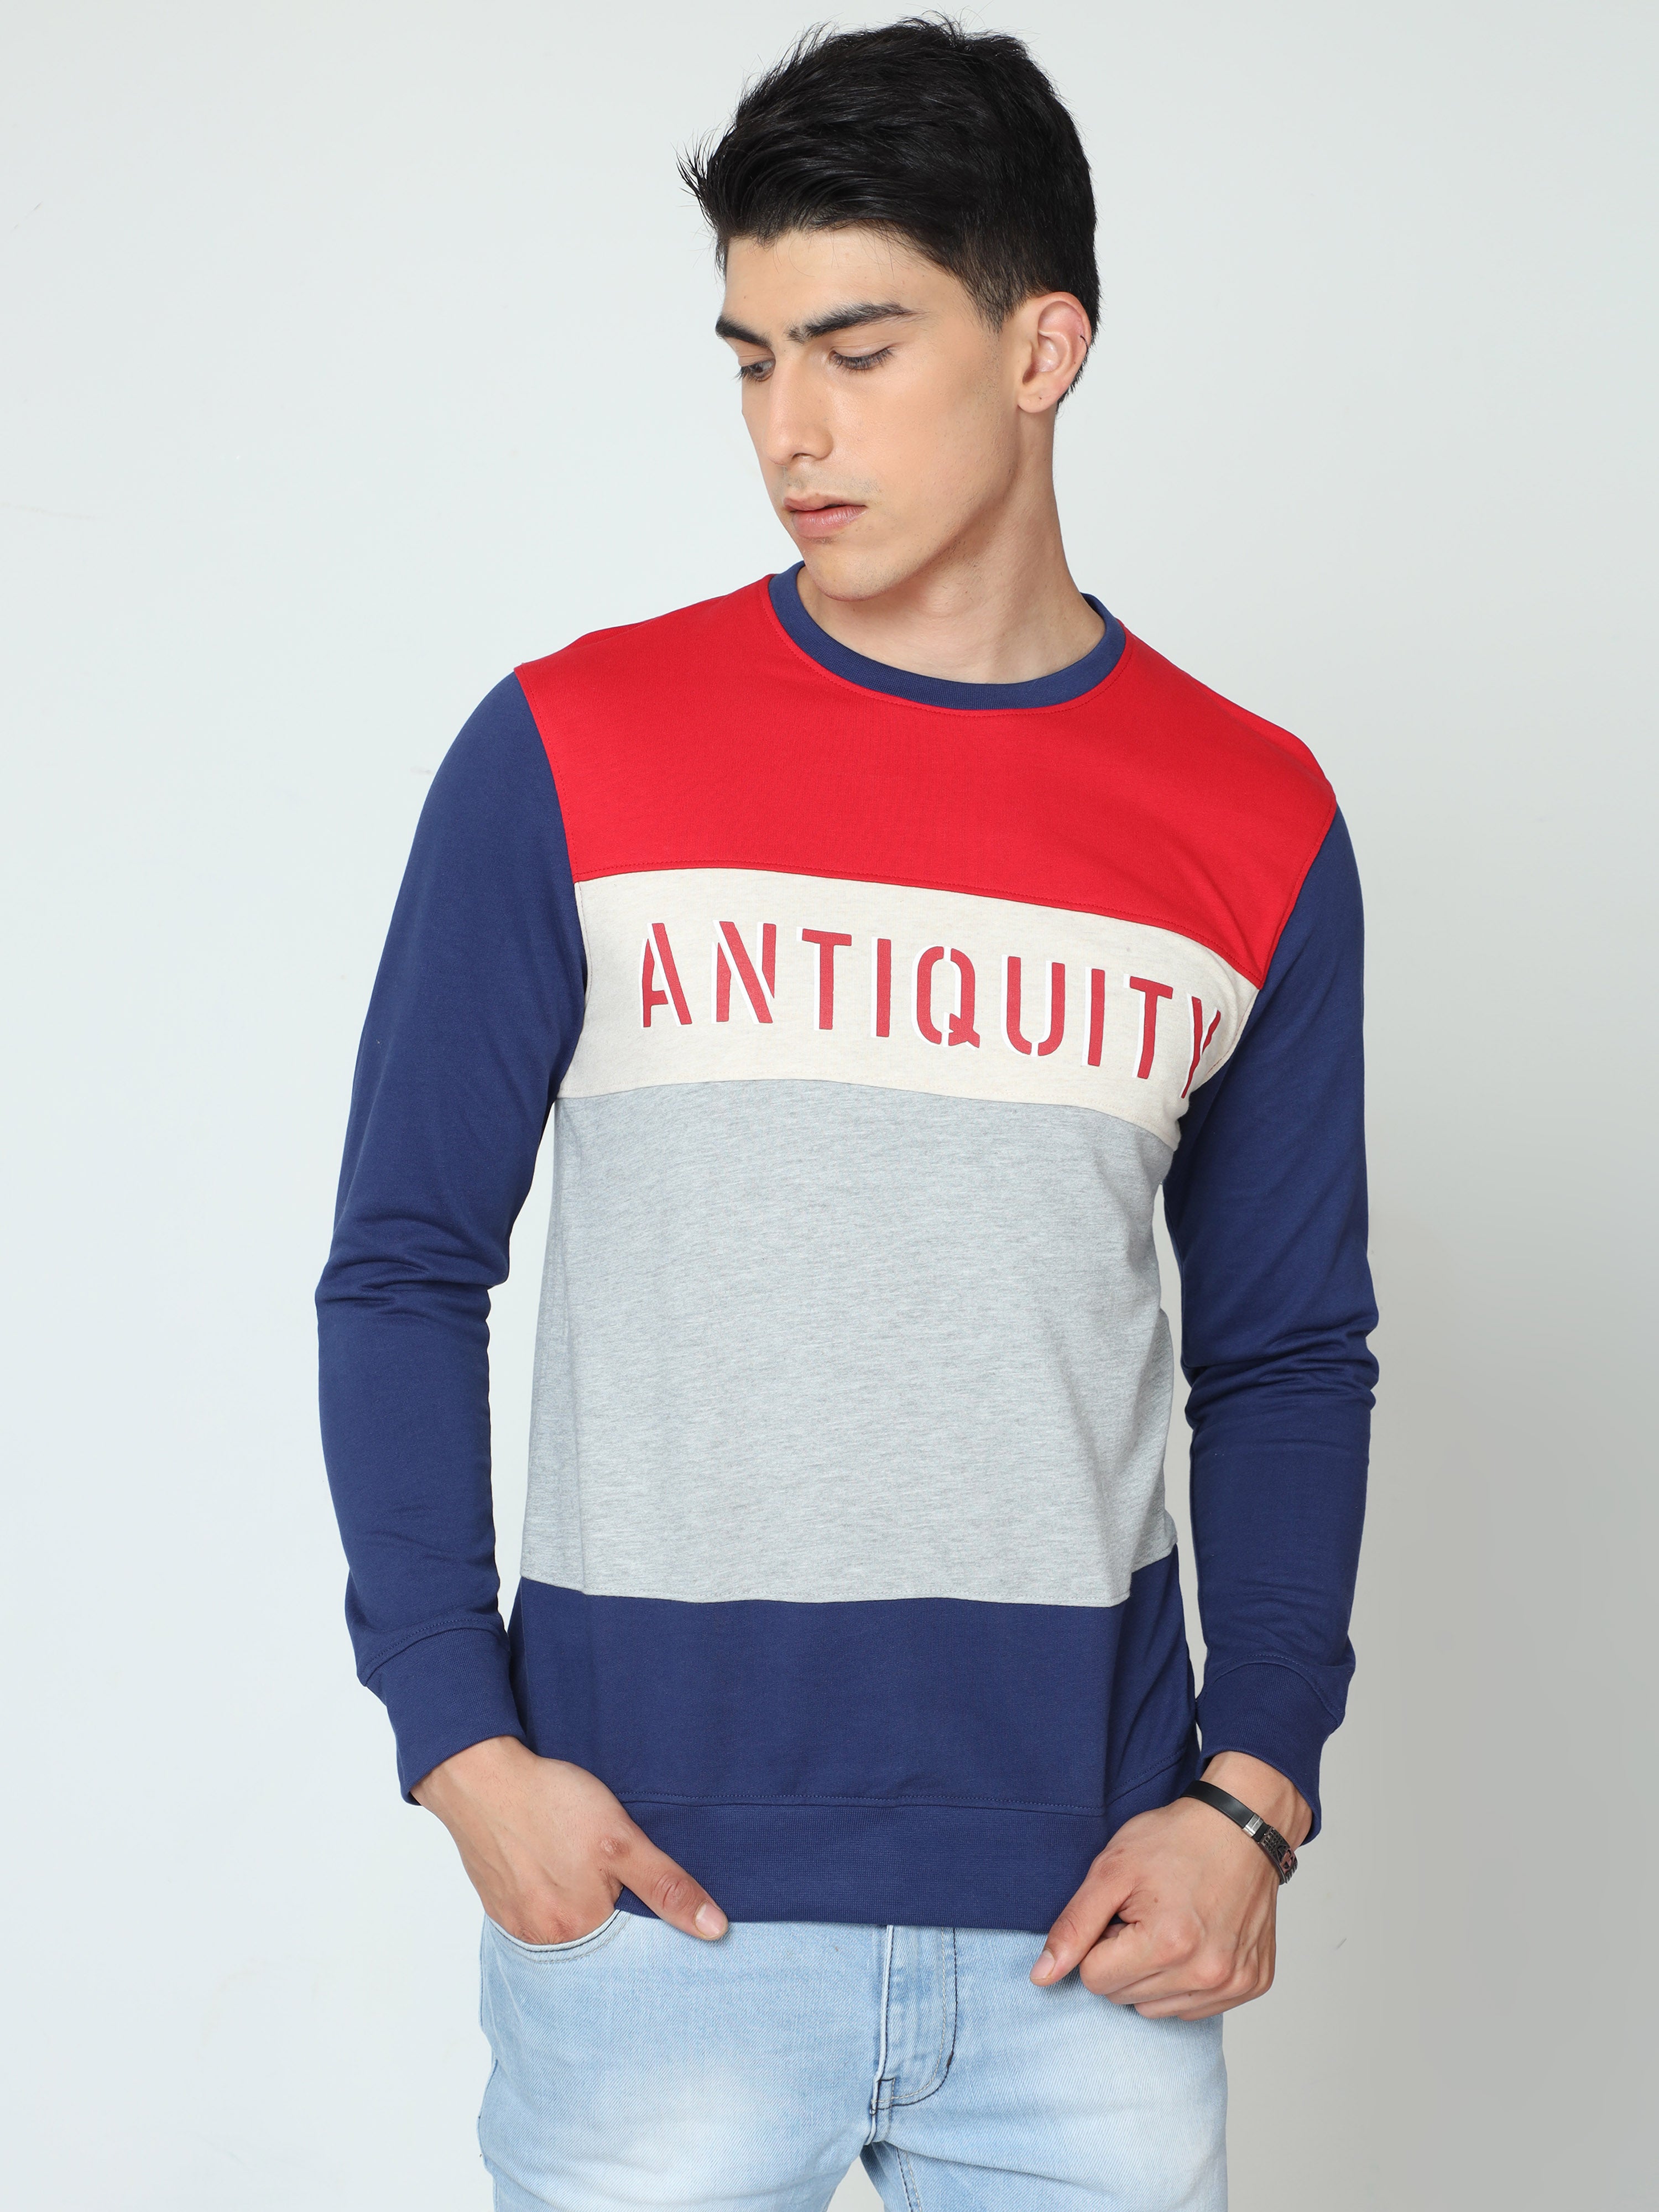 Classic Polo Mens 100% Cotton Multi Color Blocked Crew Neck Full Sleeves Slim Fit Sweat Shirt |Cp-Ss-11